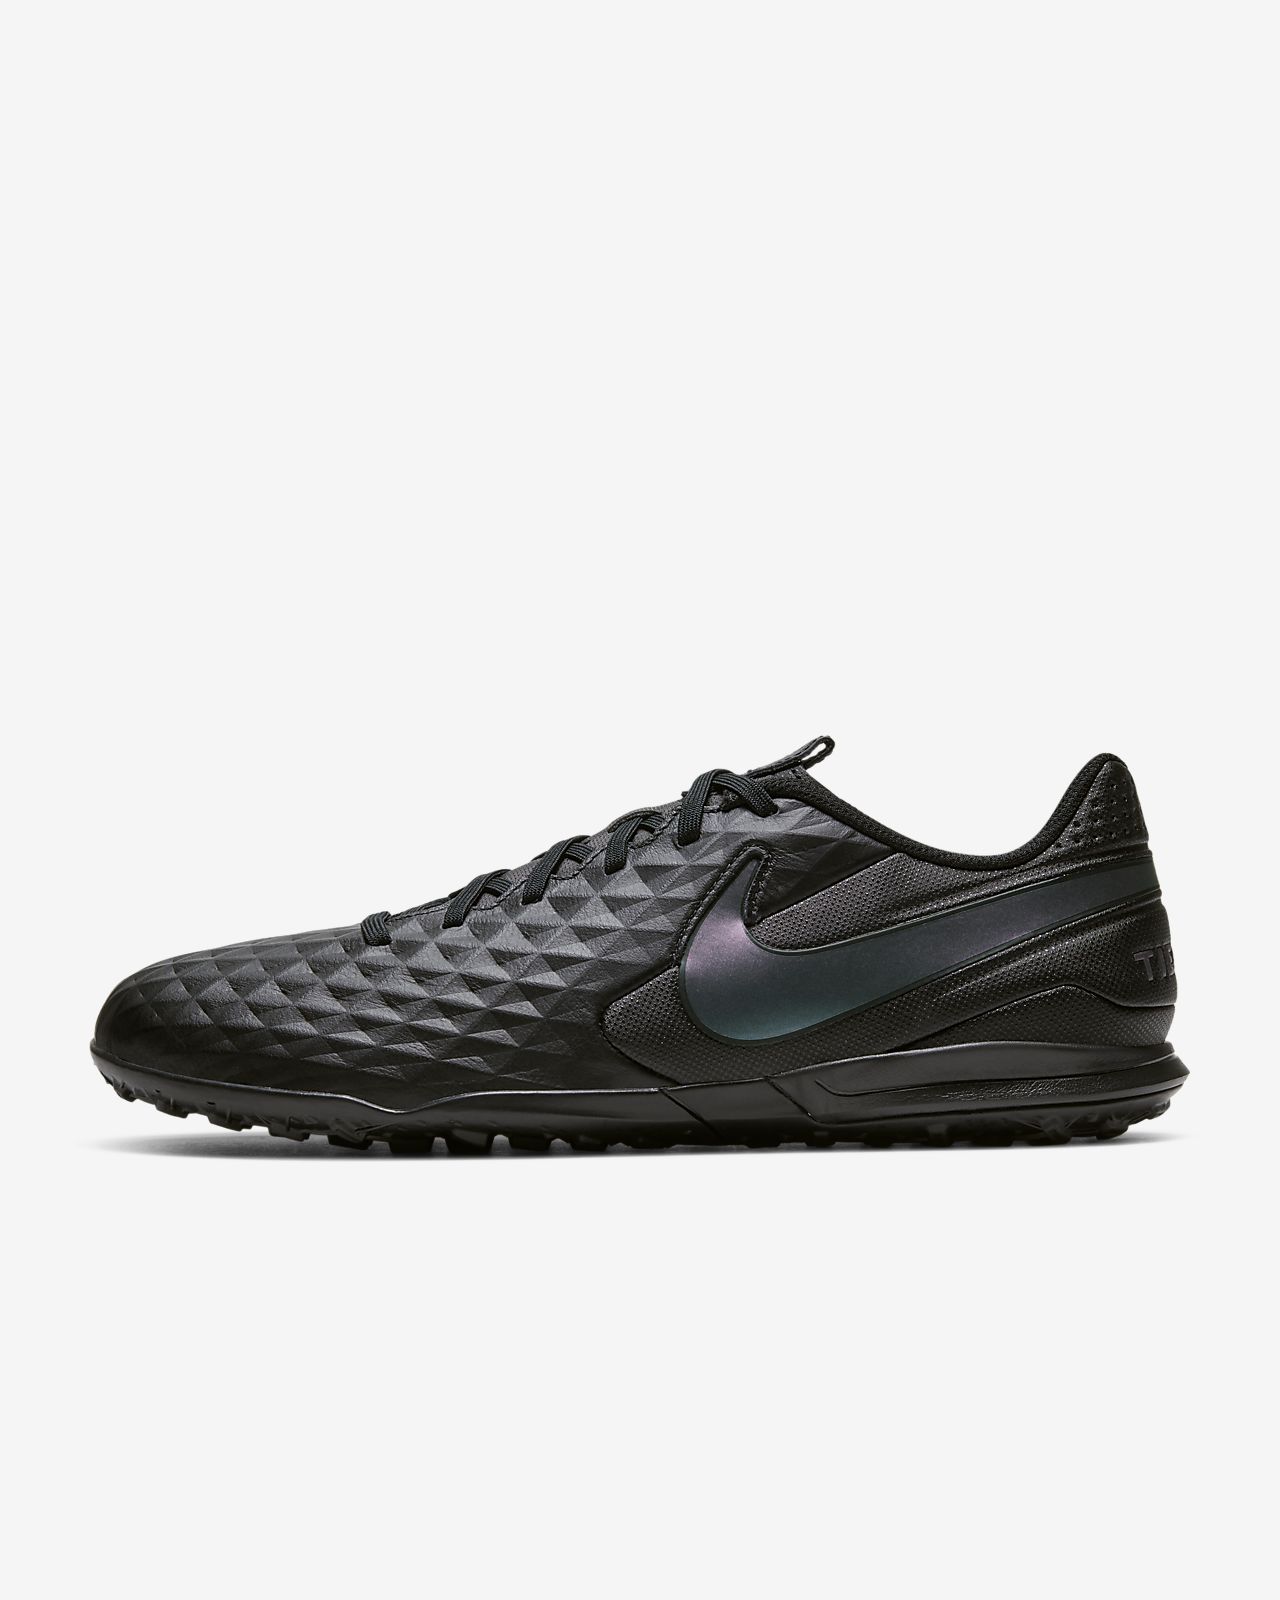 Nike LEGEND 8 ACADEMY SGPRO AC Sports from.